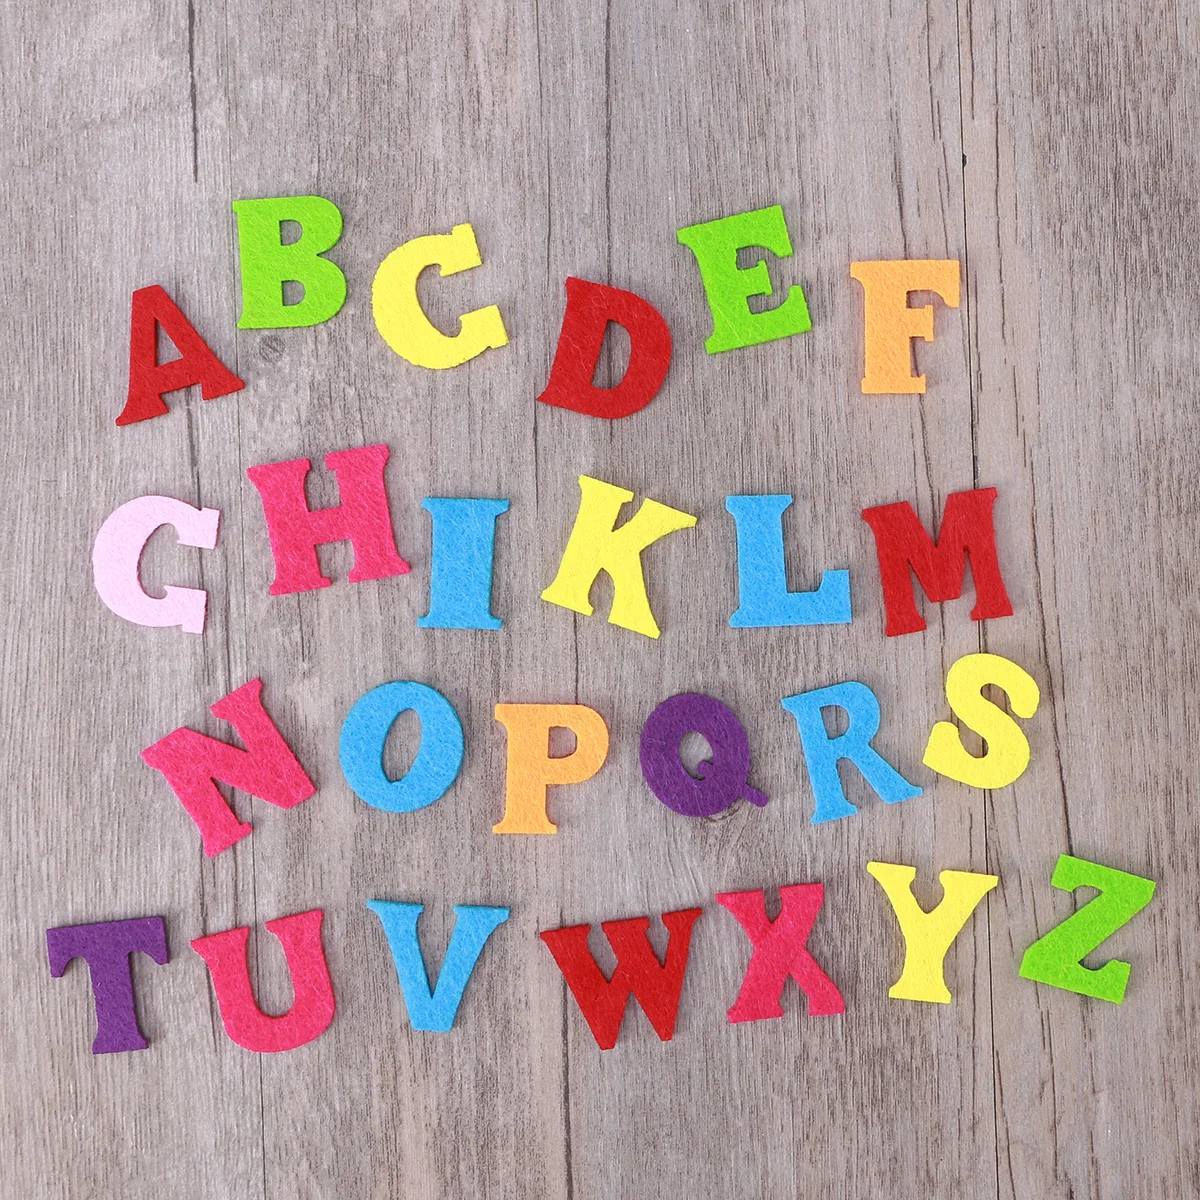 

50pcs Felt Alphabet Letters Non-woven Fabric ABCs for DIY Craft Kids Toys Christmas Birthday Party Decoration (Mixed Color and